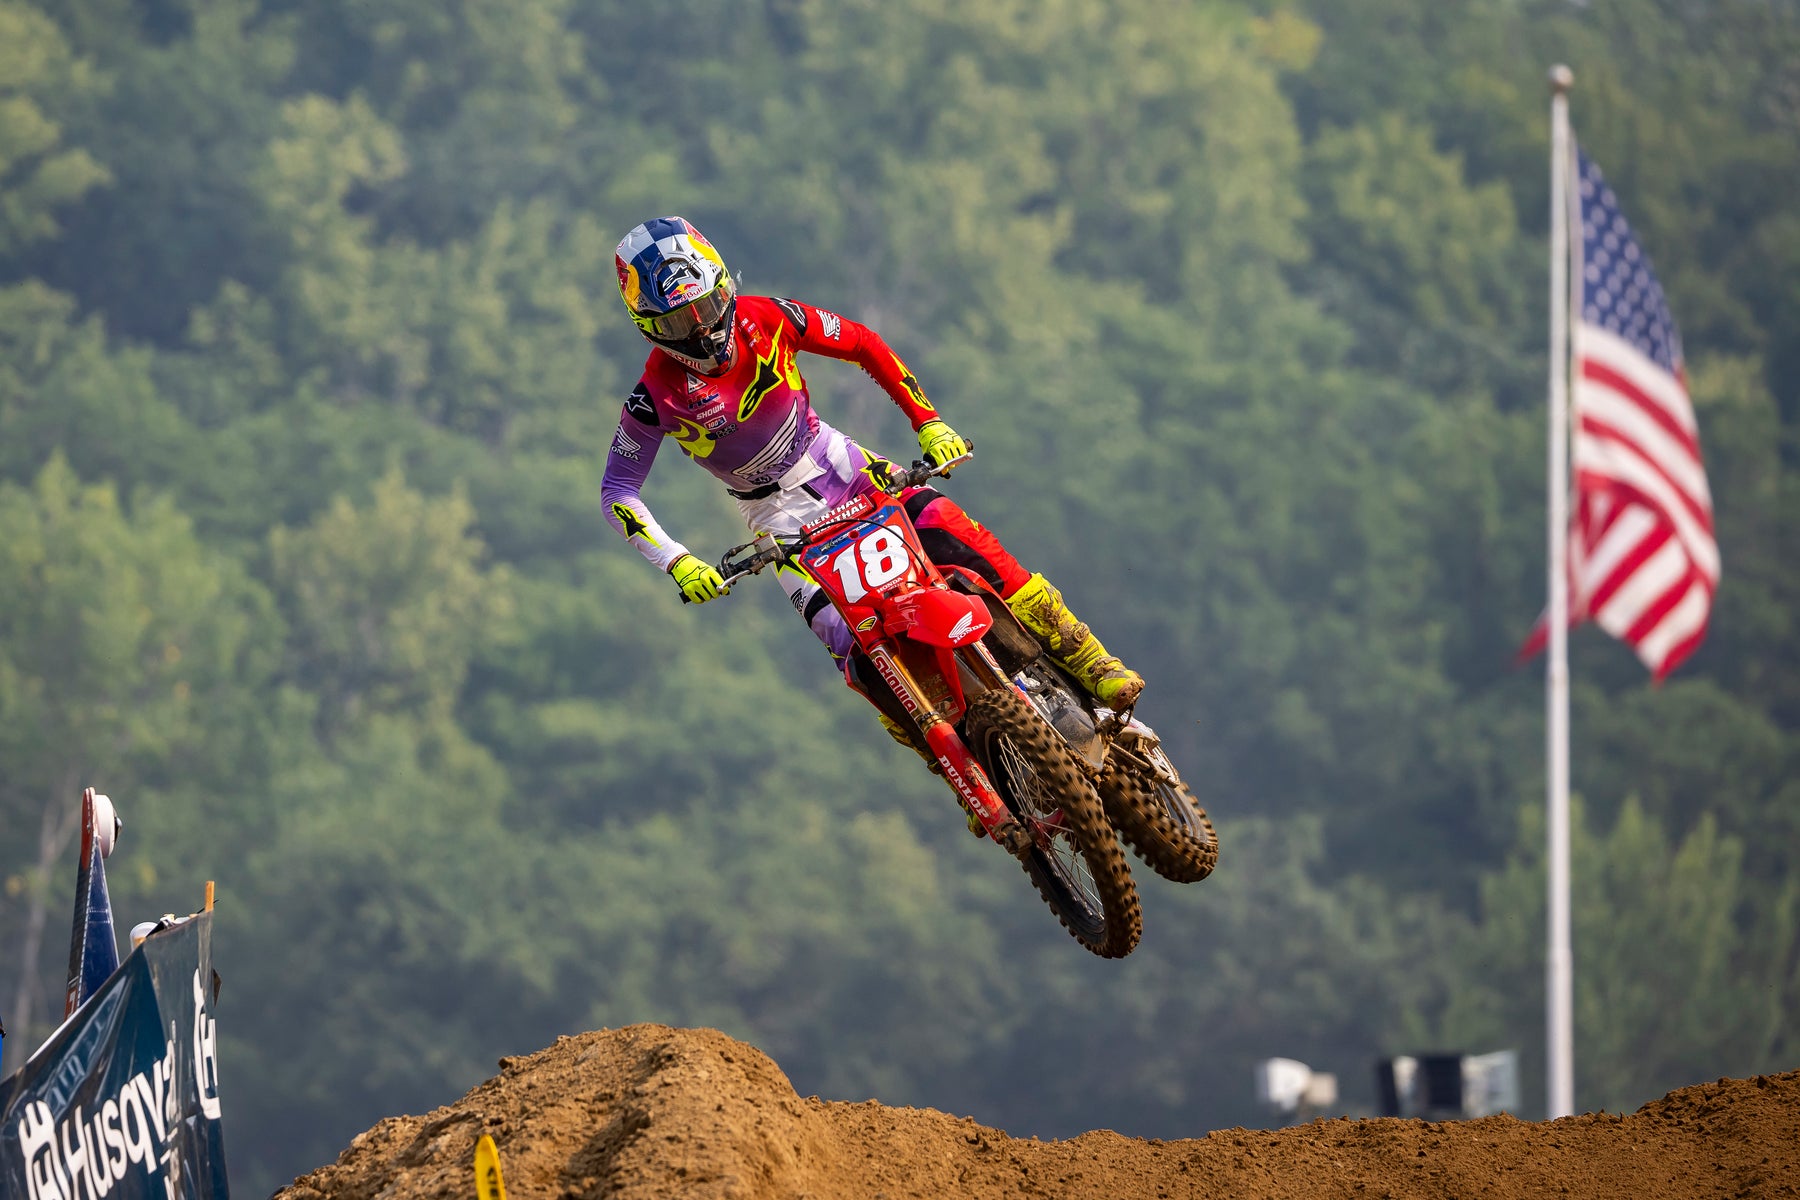 ALPINESTARS TOP FOUR LOCK-OUT AS HARD-CHARGING JETT LAWRENCE DOMINATES 450 RACES AT SPRING CREEK NATIONAL